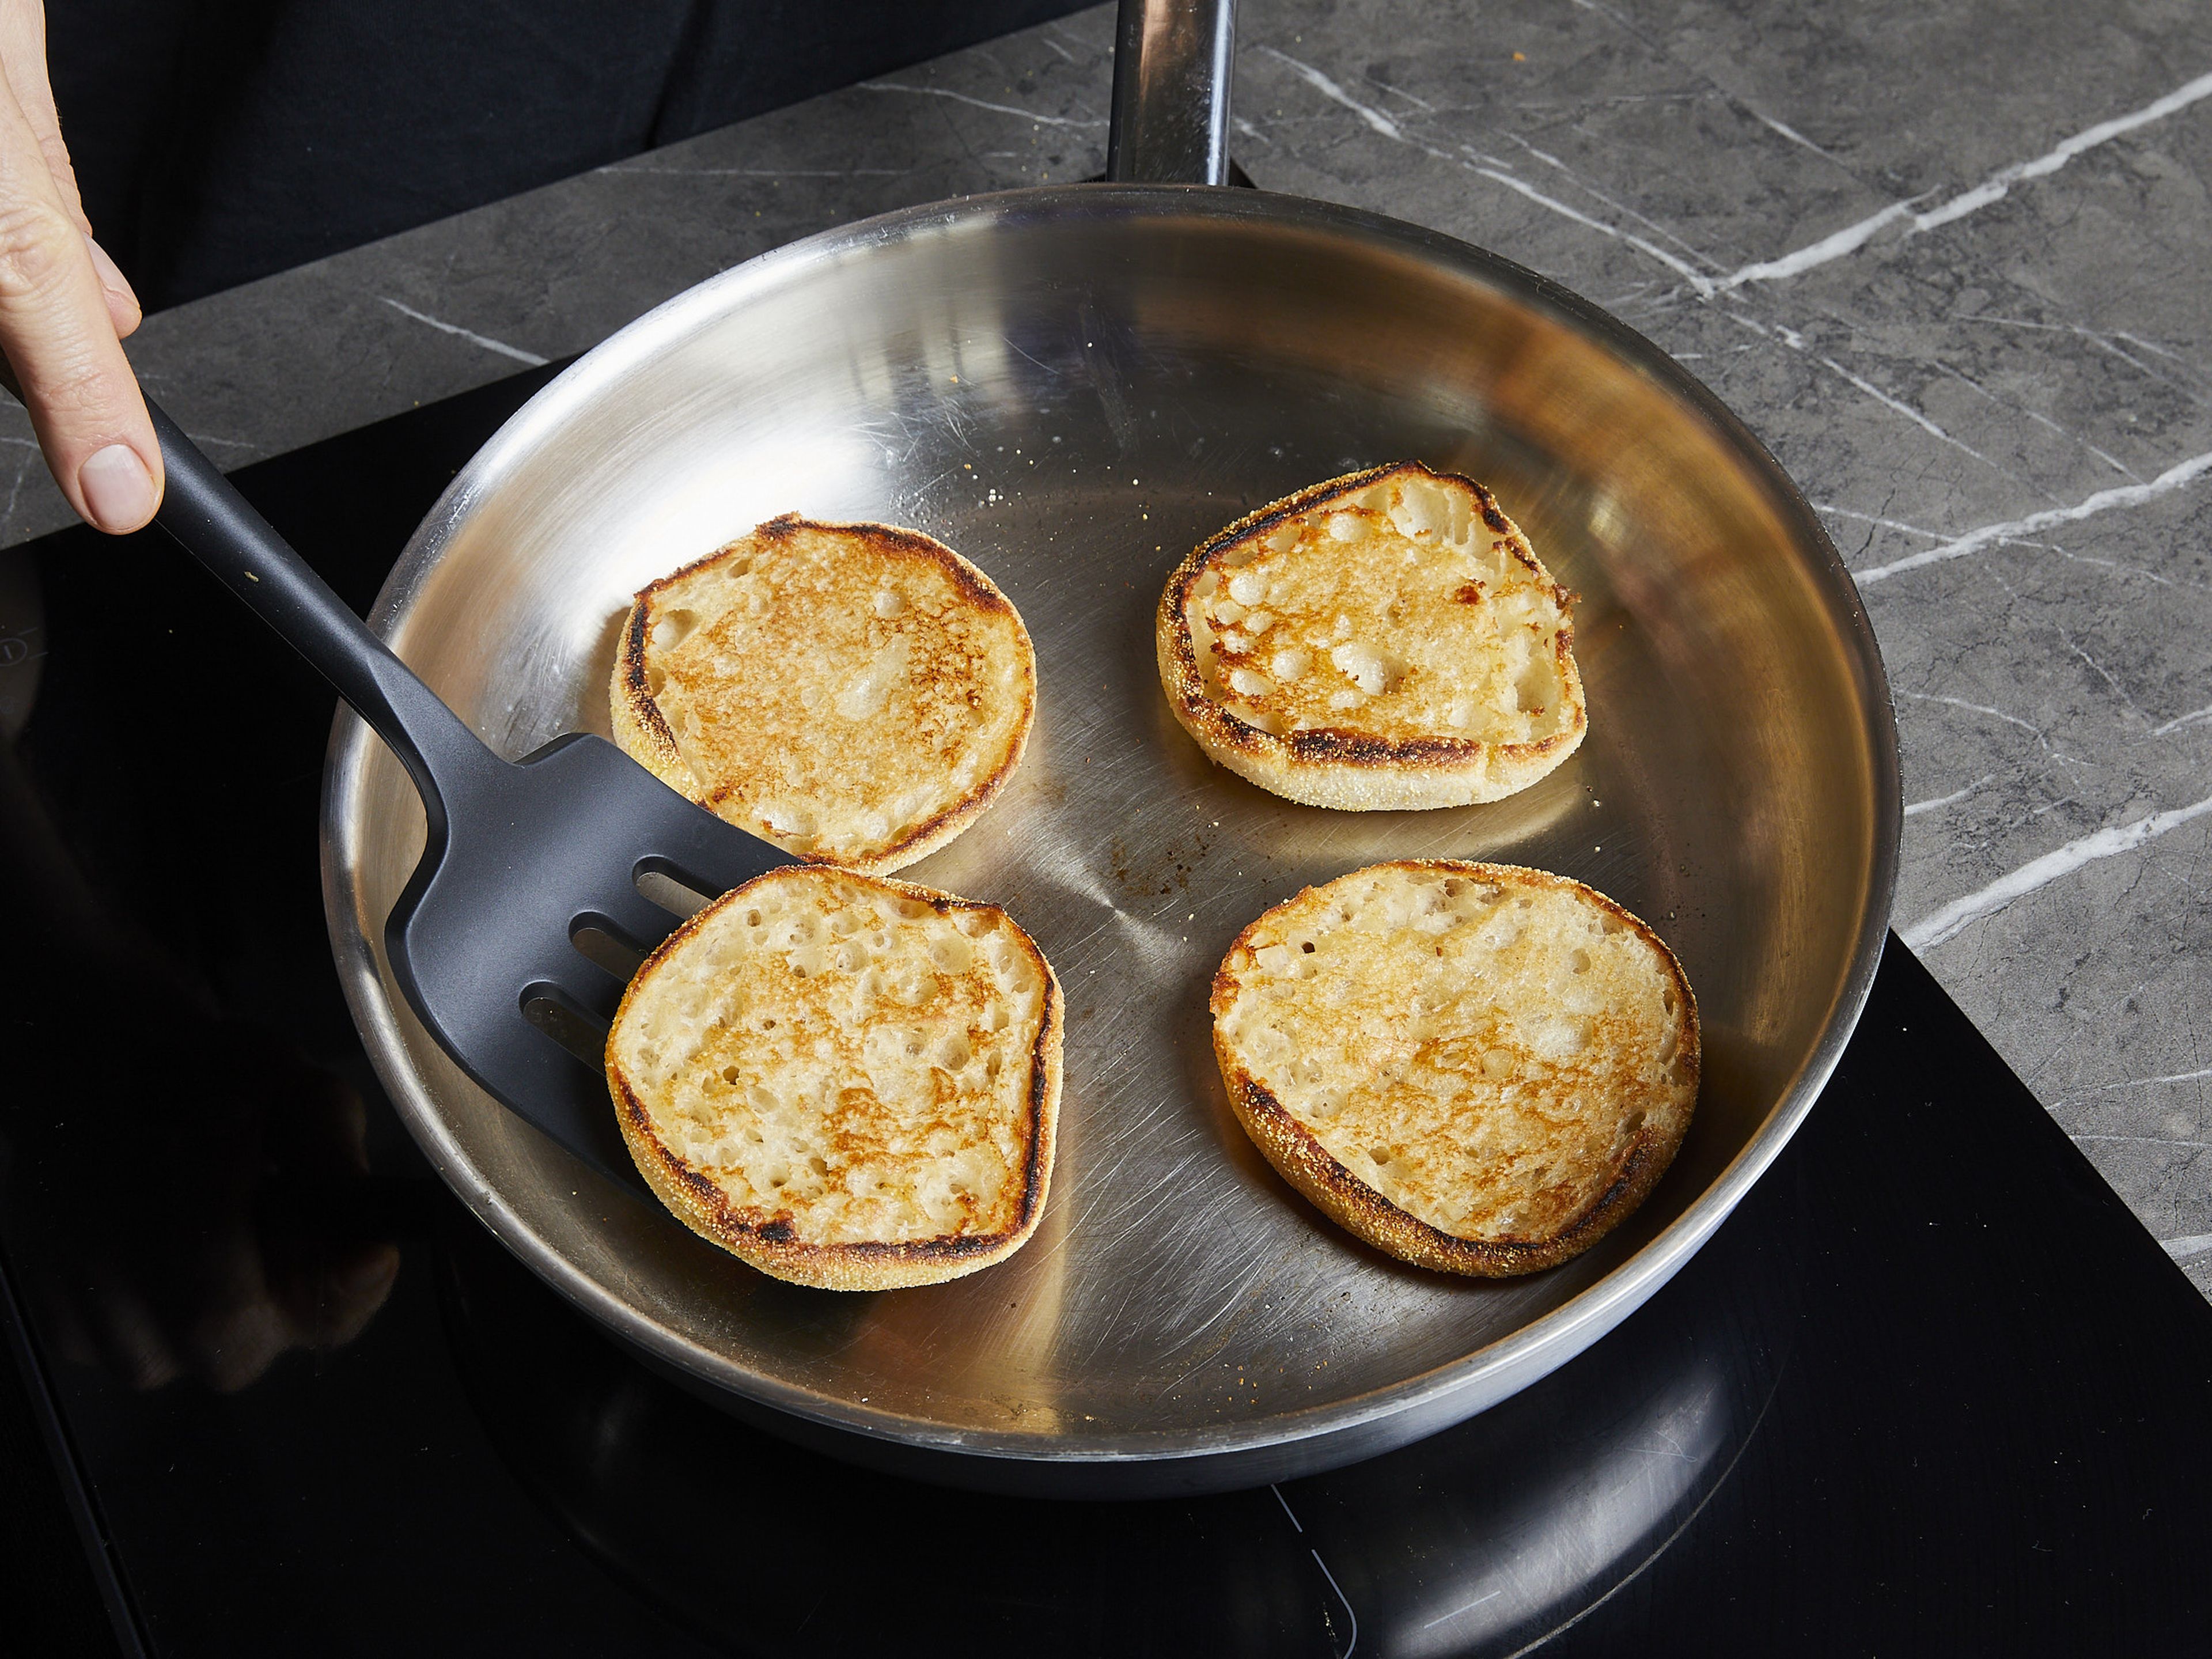 Melt some butter in a large frying pan, cut the English muffins open, toast until golden brown, and set aside.